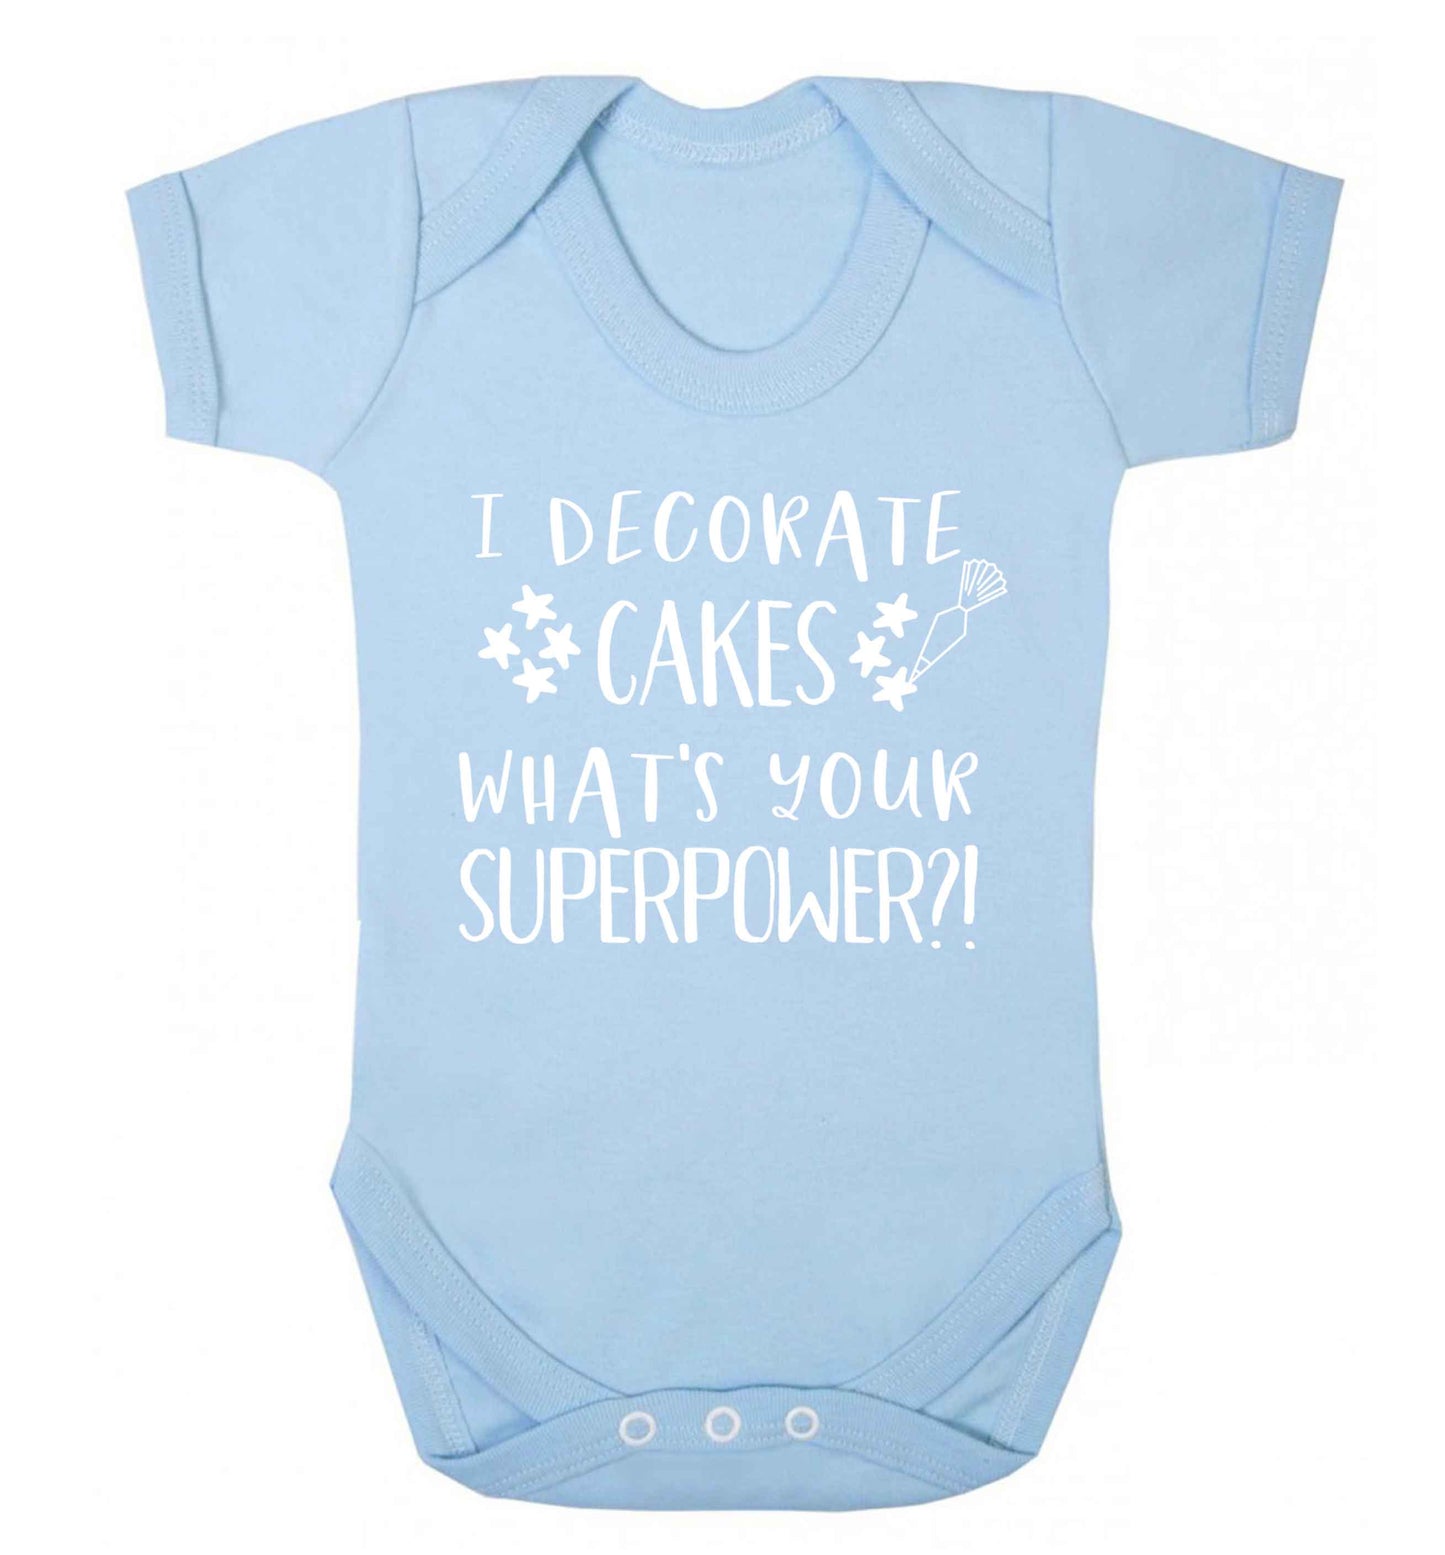 I decorate cakes what's your superpower?! Baby Vest pale blue 18-24 months